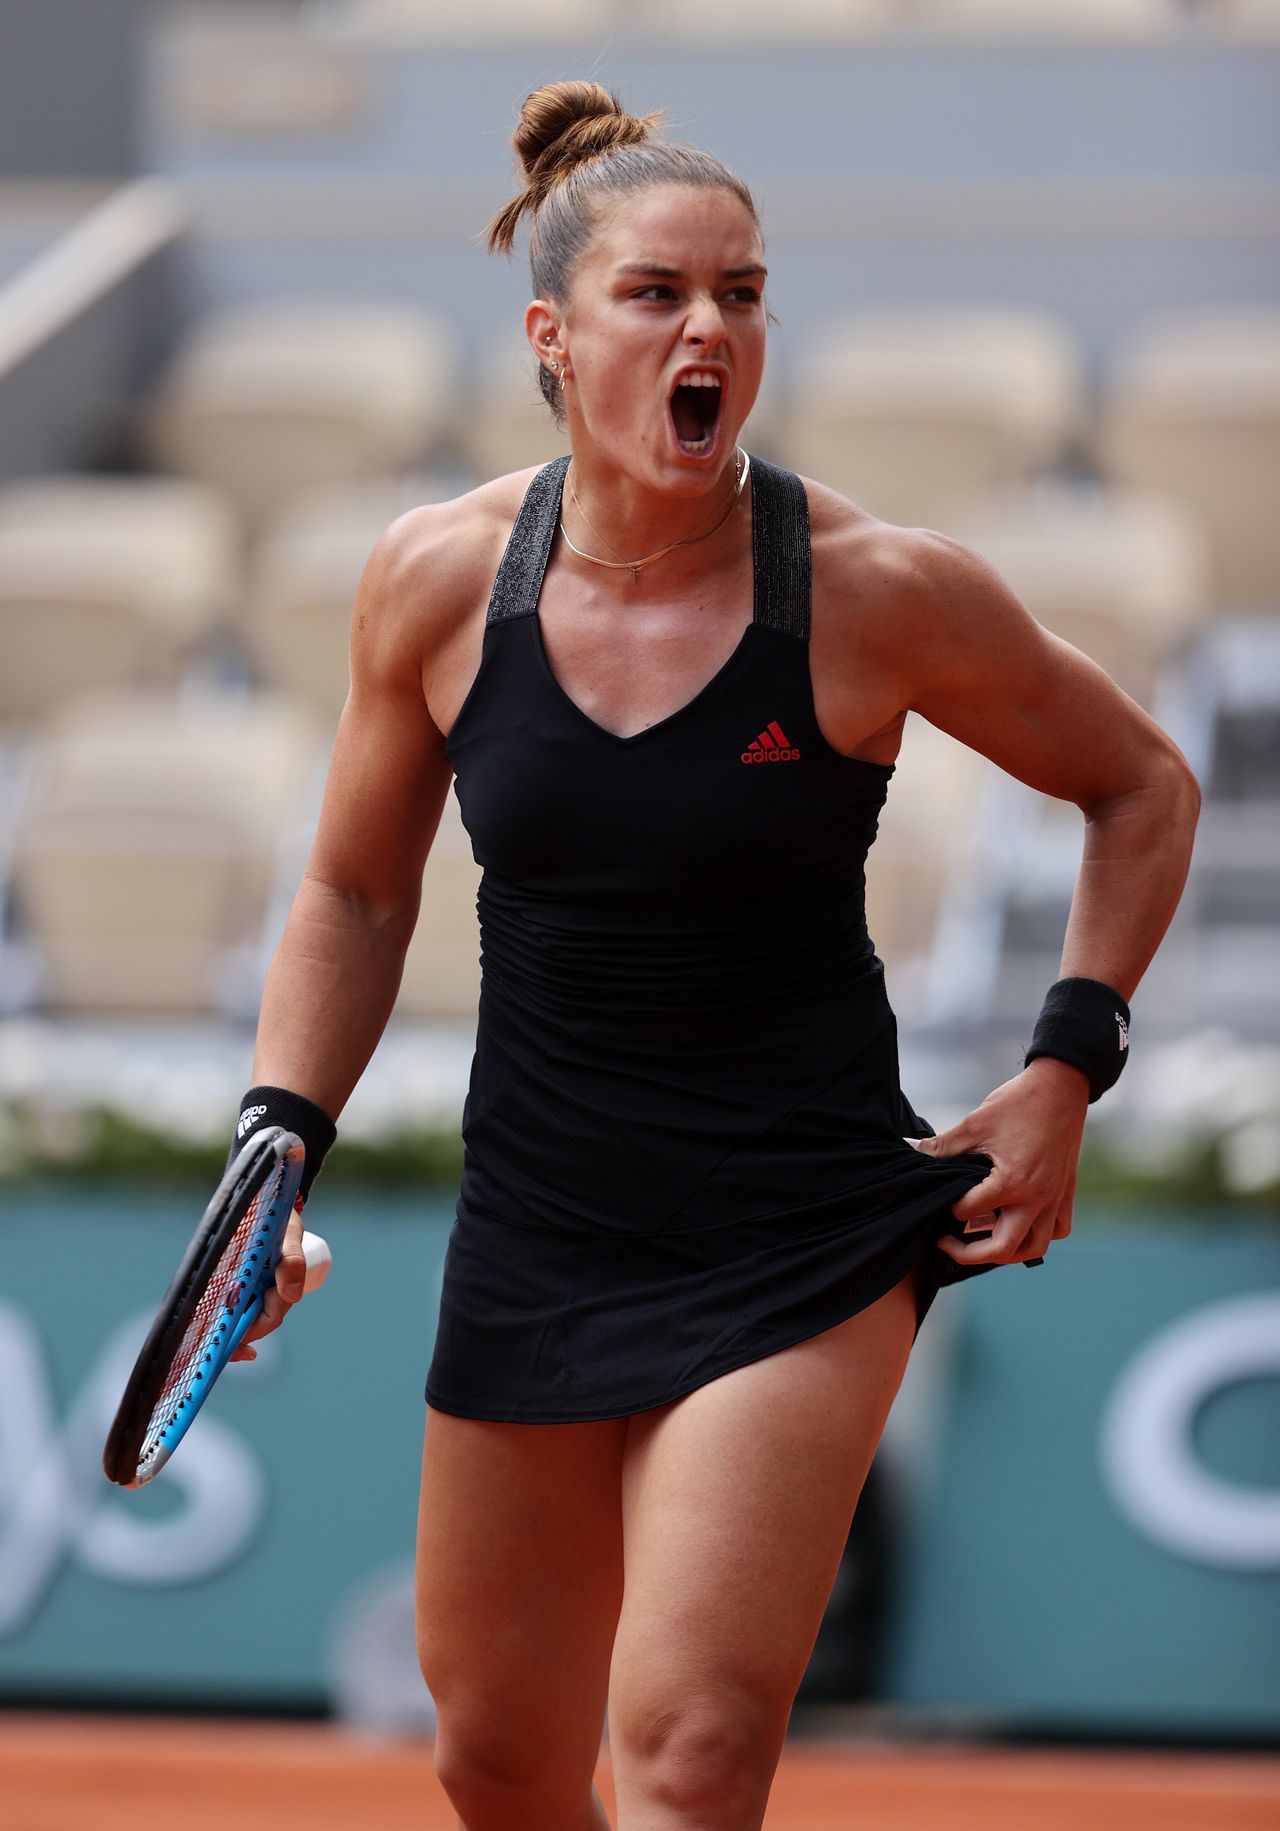 PARIS, FRANCE - JUNE 09: Maria Sakkari of Greece celebrates during her Ladies Singles Quarter-Final match against Iga Swiatek of Poland on Day Eleven of the 2021 French Open at Roland Garros on June 09, 2021 in Paris, France. (Photo by Clive Brunskill/Getty Images)